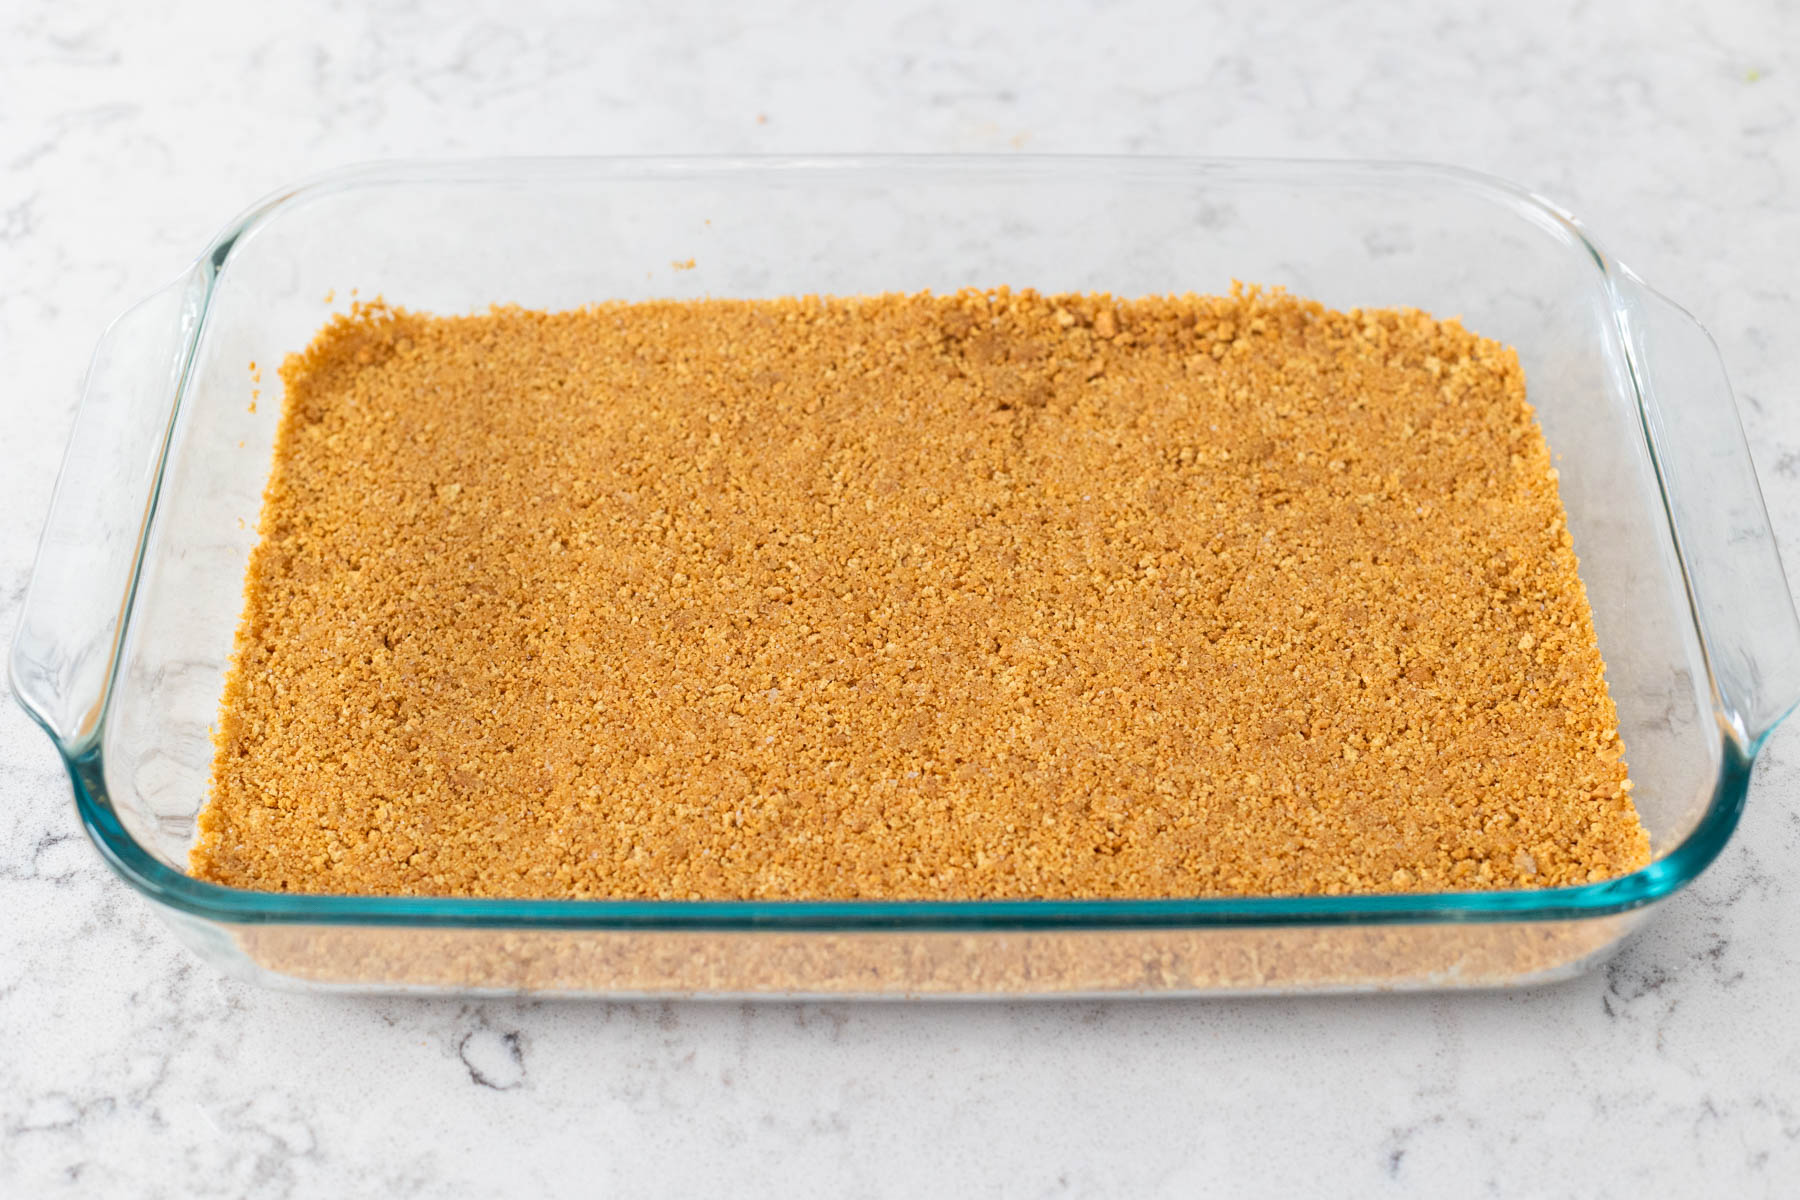 A baking dish is filled with a graham cracker crust.